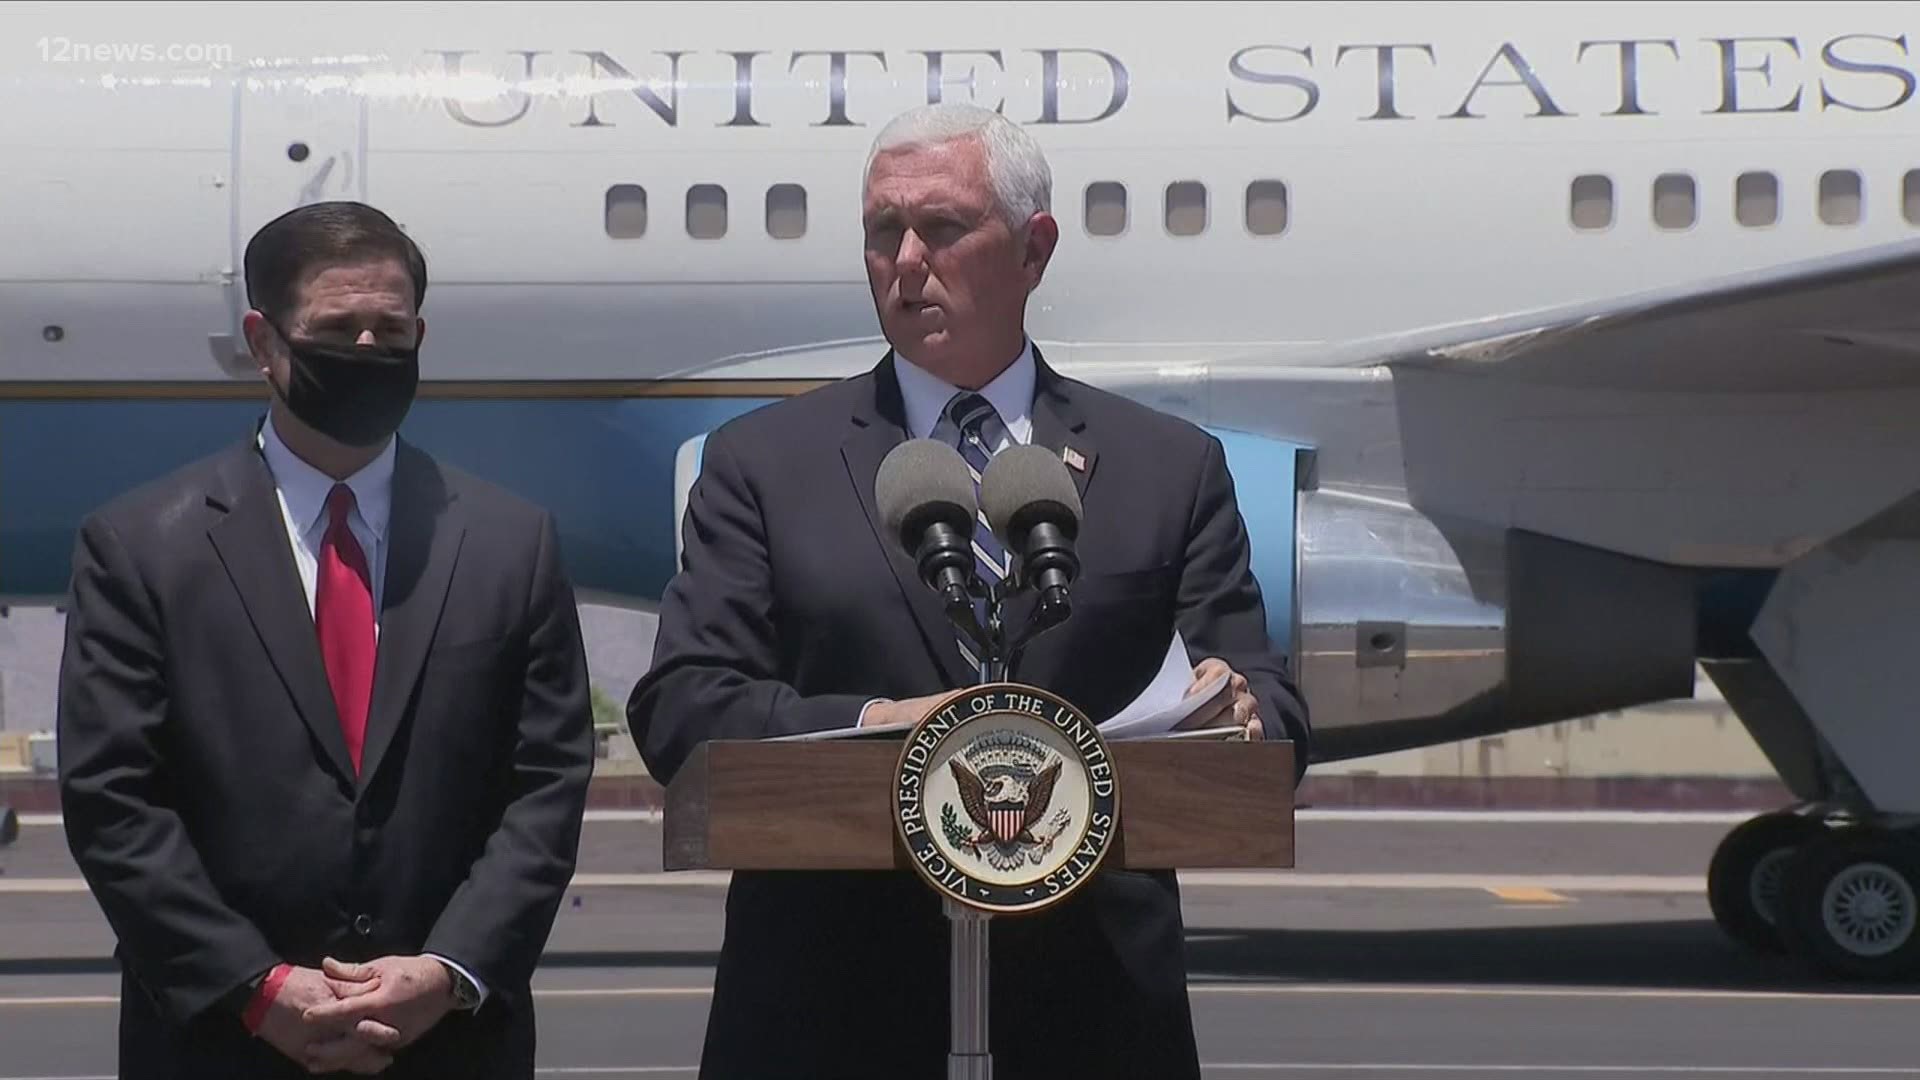 Air Force Two landed in Phoenix where the vice president and state leaders talked about the COVID-19 response in Arizona.